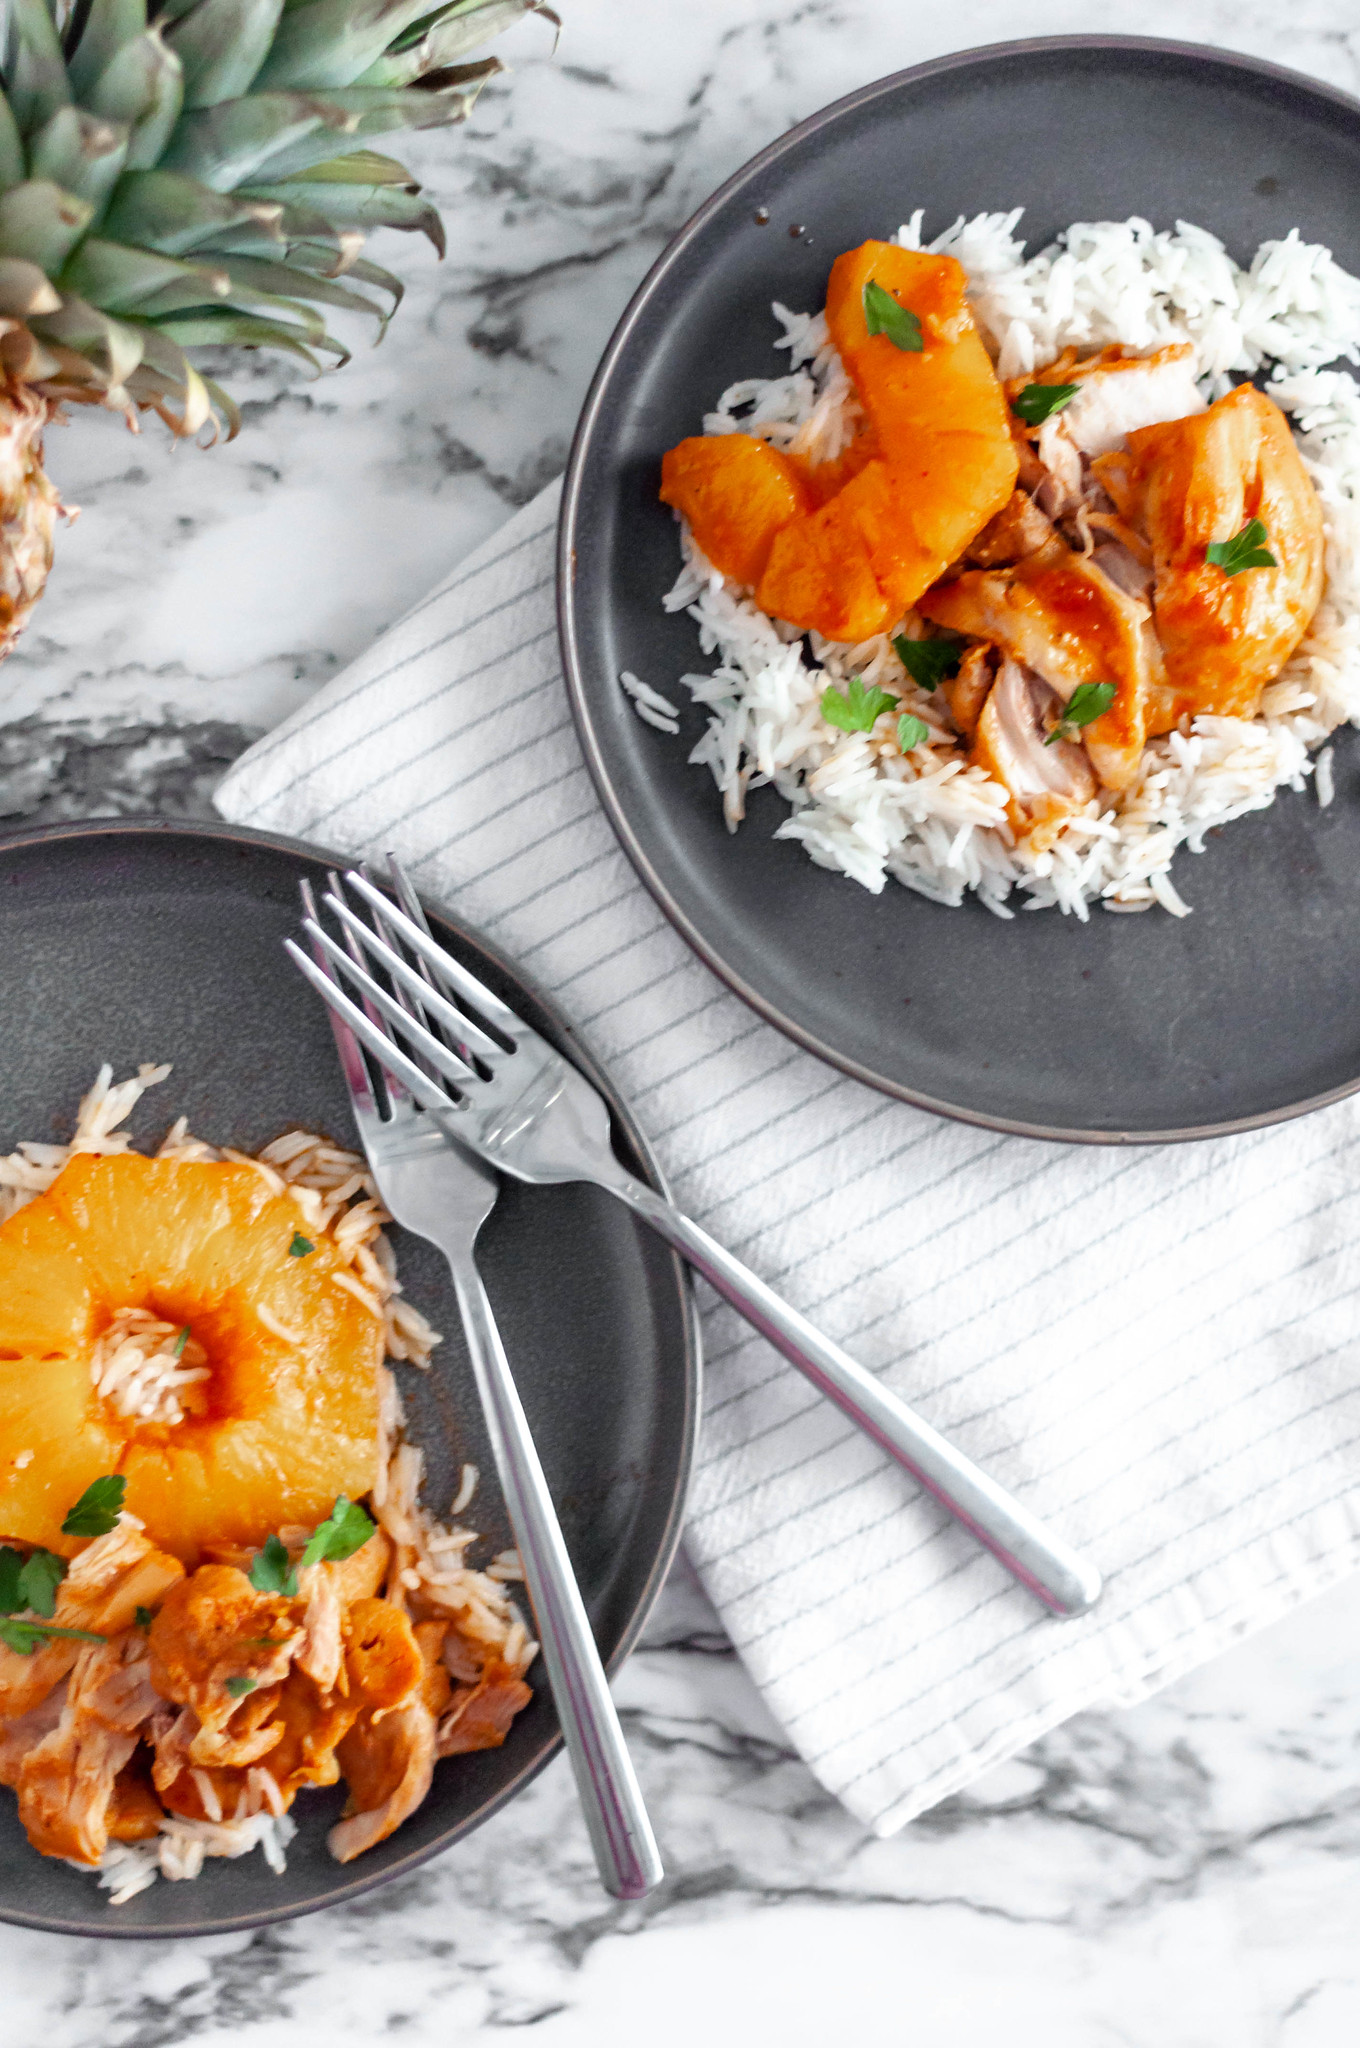 Pineapple BBQ Instant Pot Chicken is packed full of flavor and yields a super tender chicken. Serve over rice for a super simple and quick weeknight meal.